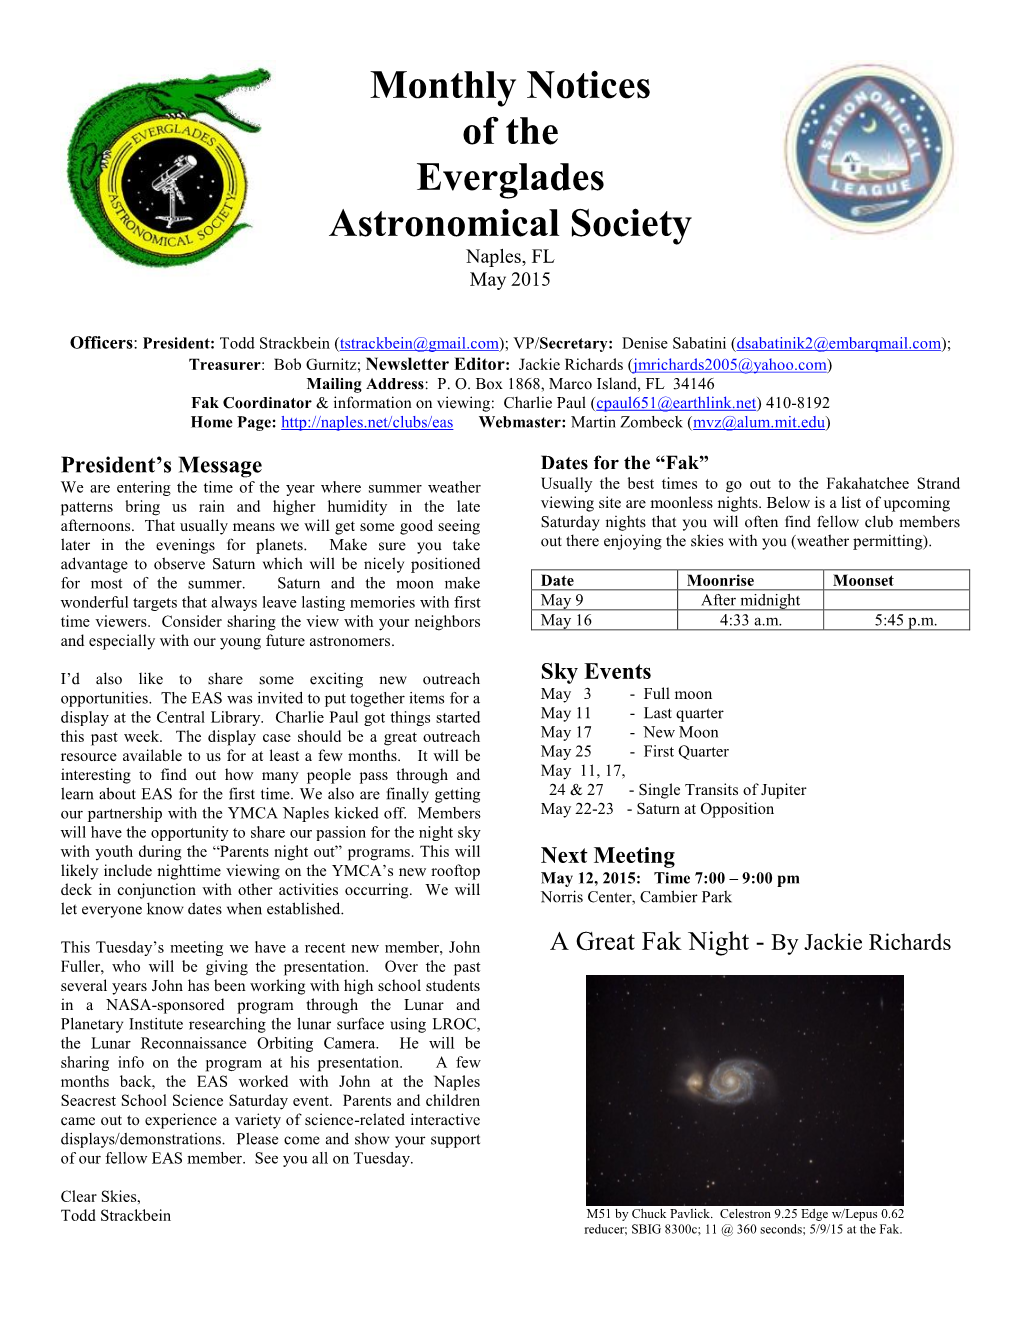 Monthly Notices of the Everglades Astronomical